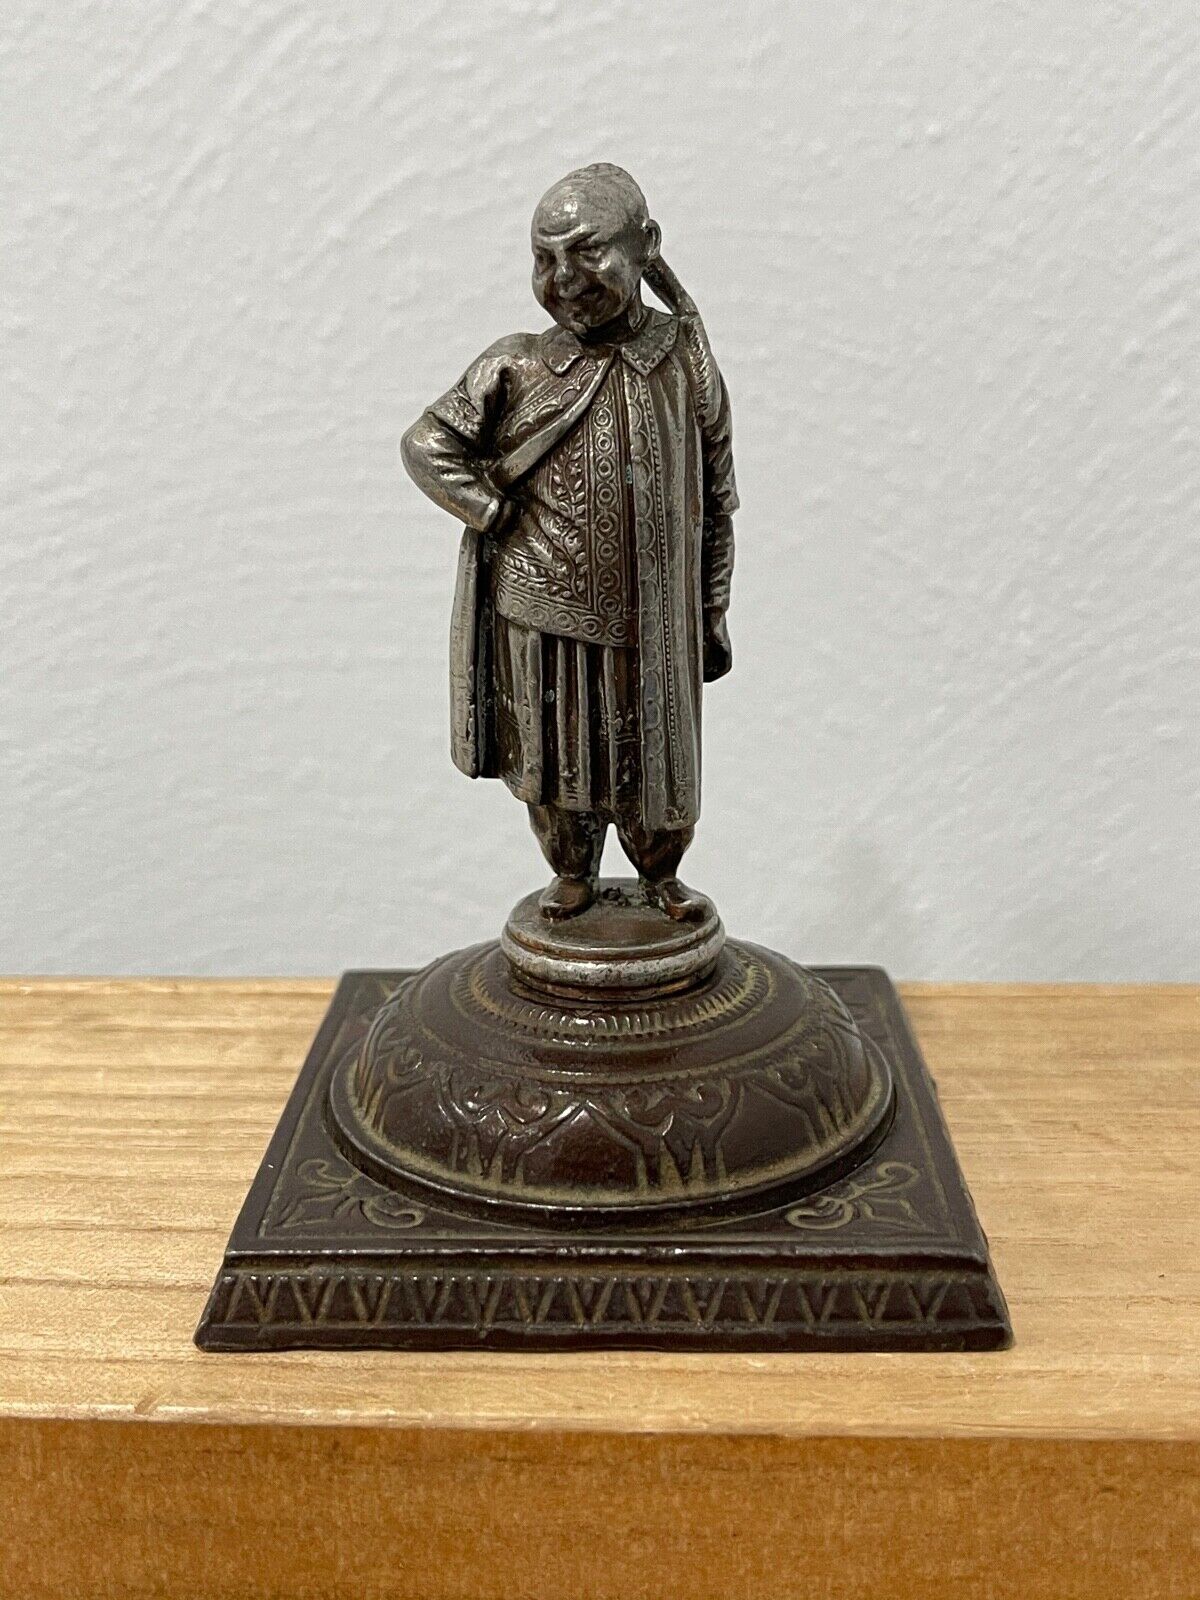 Vintage Antique Asian Silvered Metal Statue / Figurine of Man in Robe